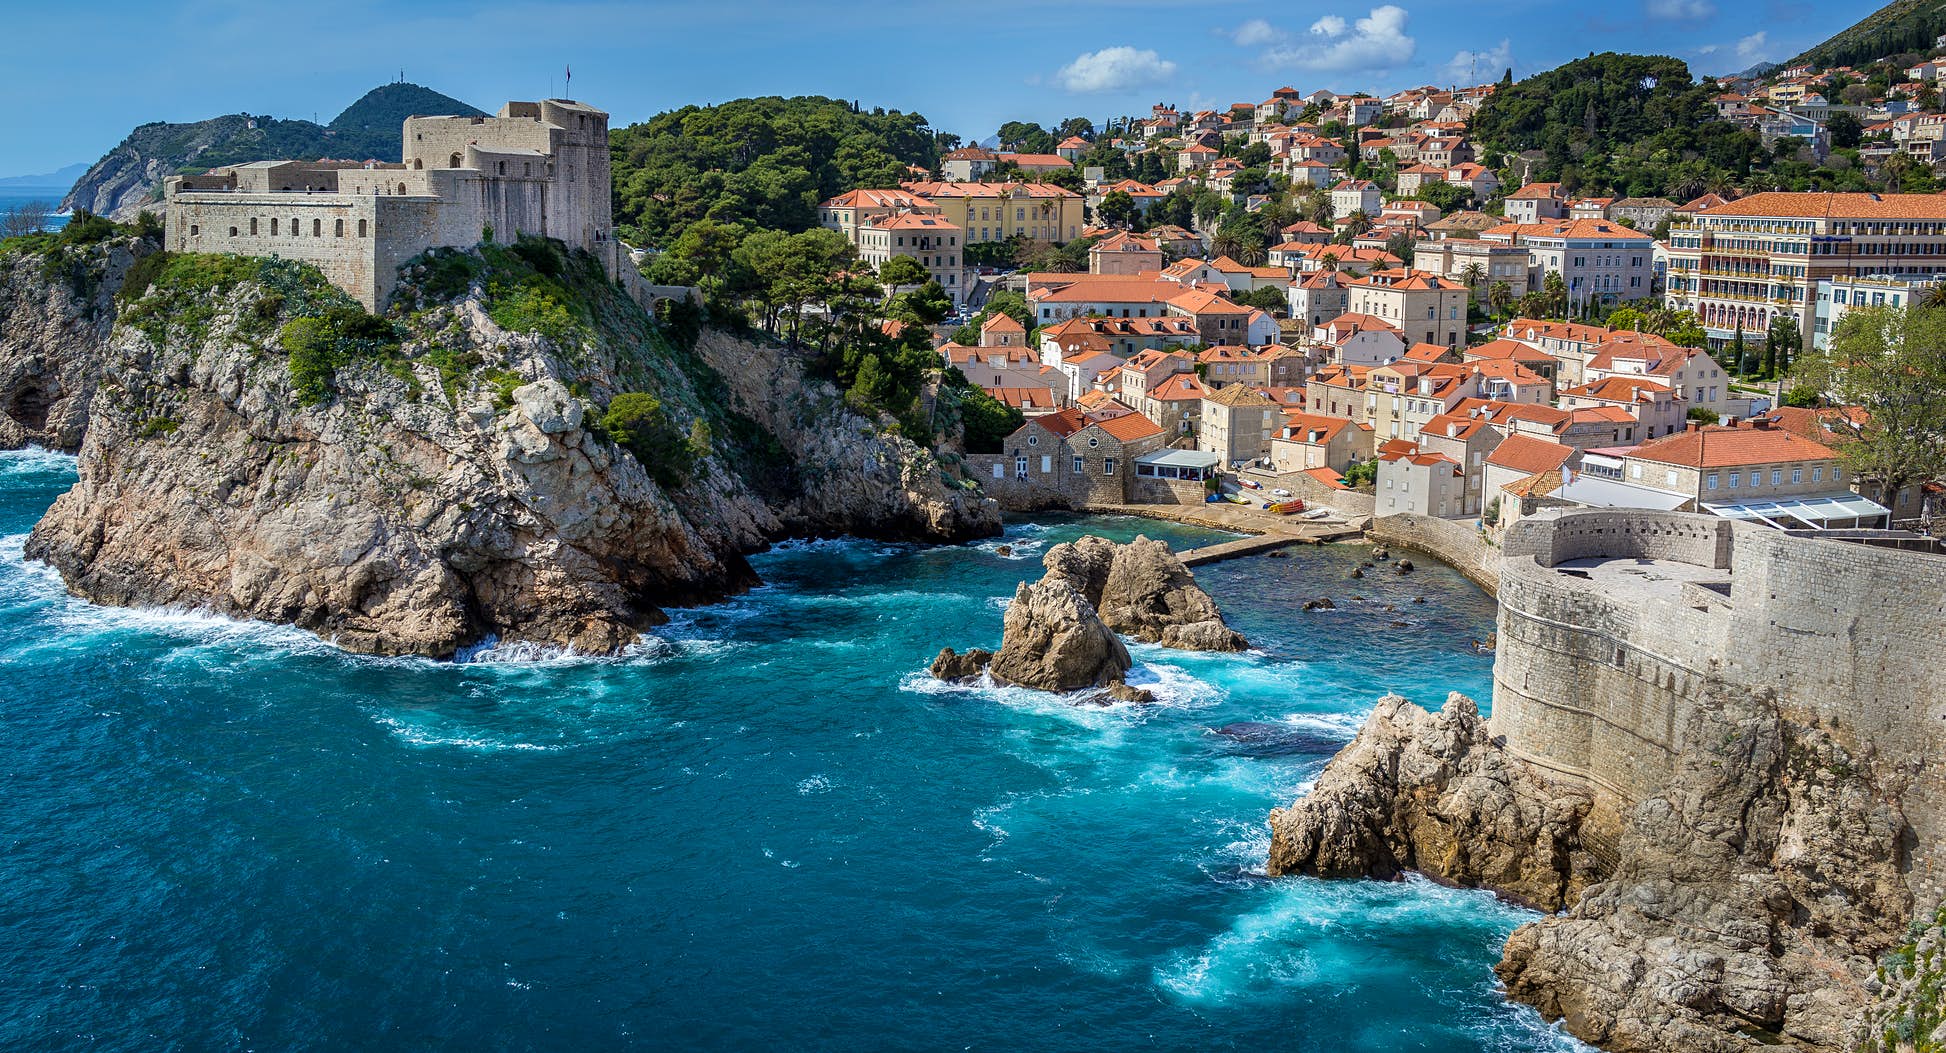 The cruise will stop along the beautiful coasts of Croatia, including Dubrovnik ©Cory Schadt/500px